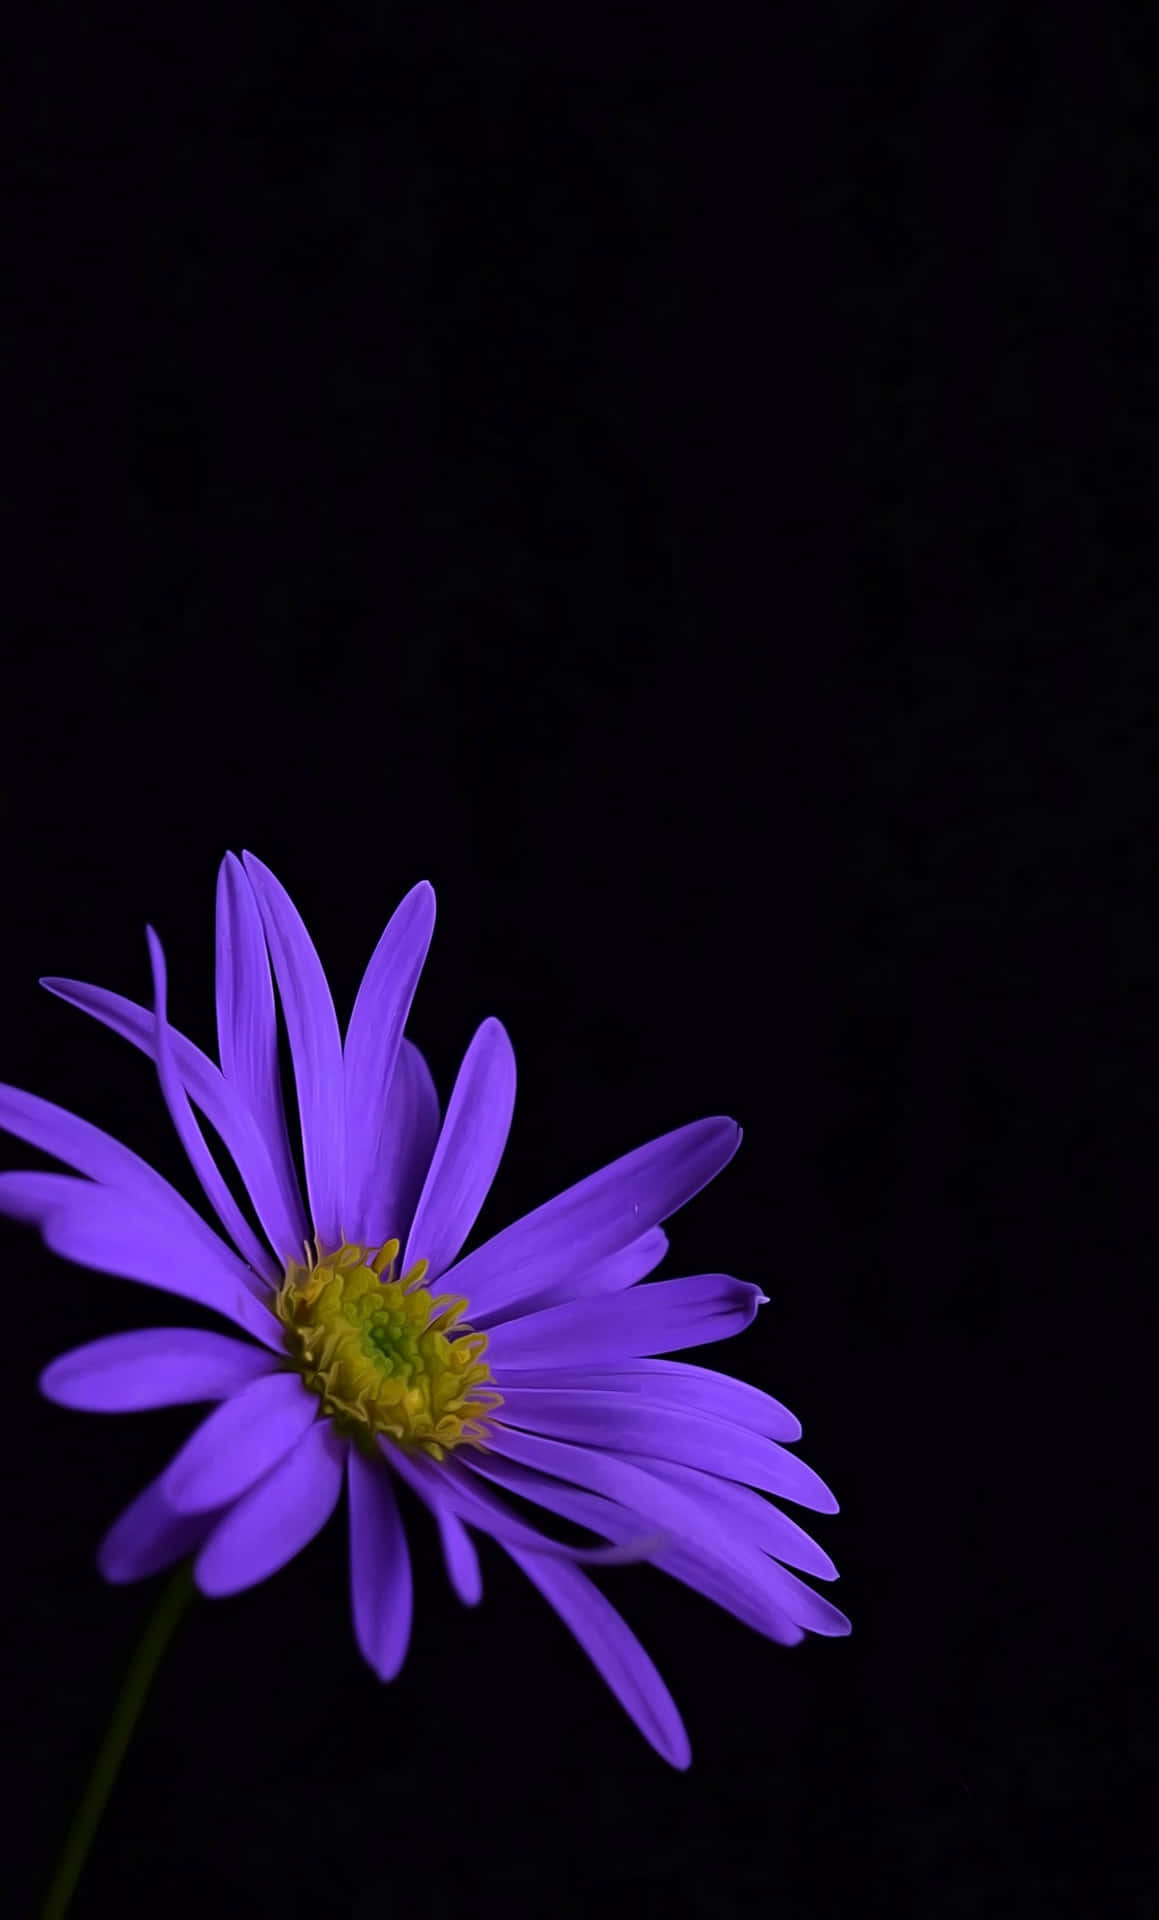 "The Radiance of a Lovely Purple Flower"